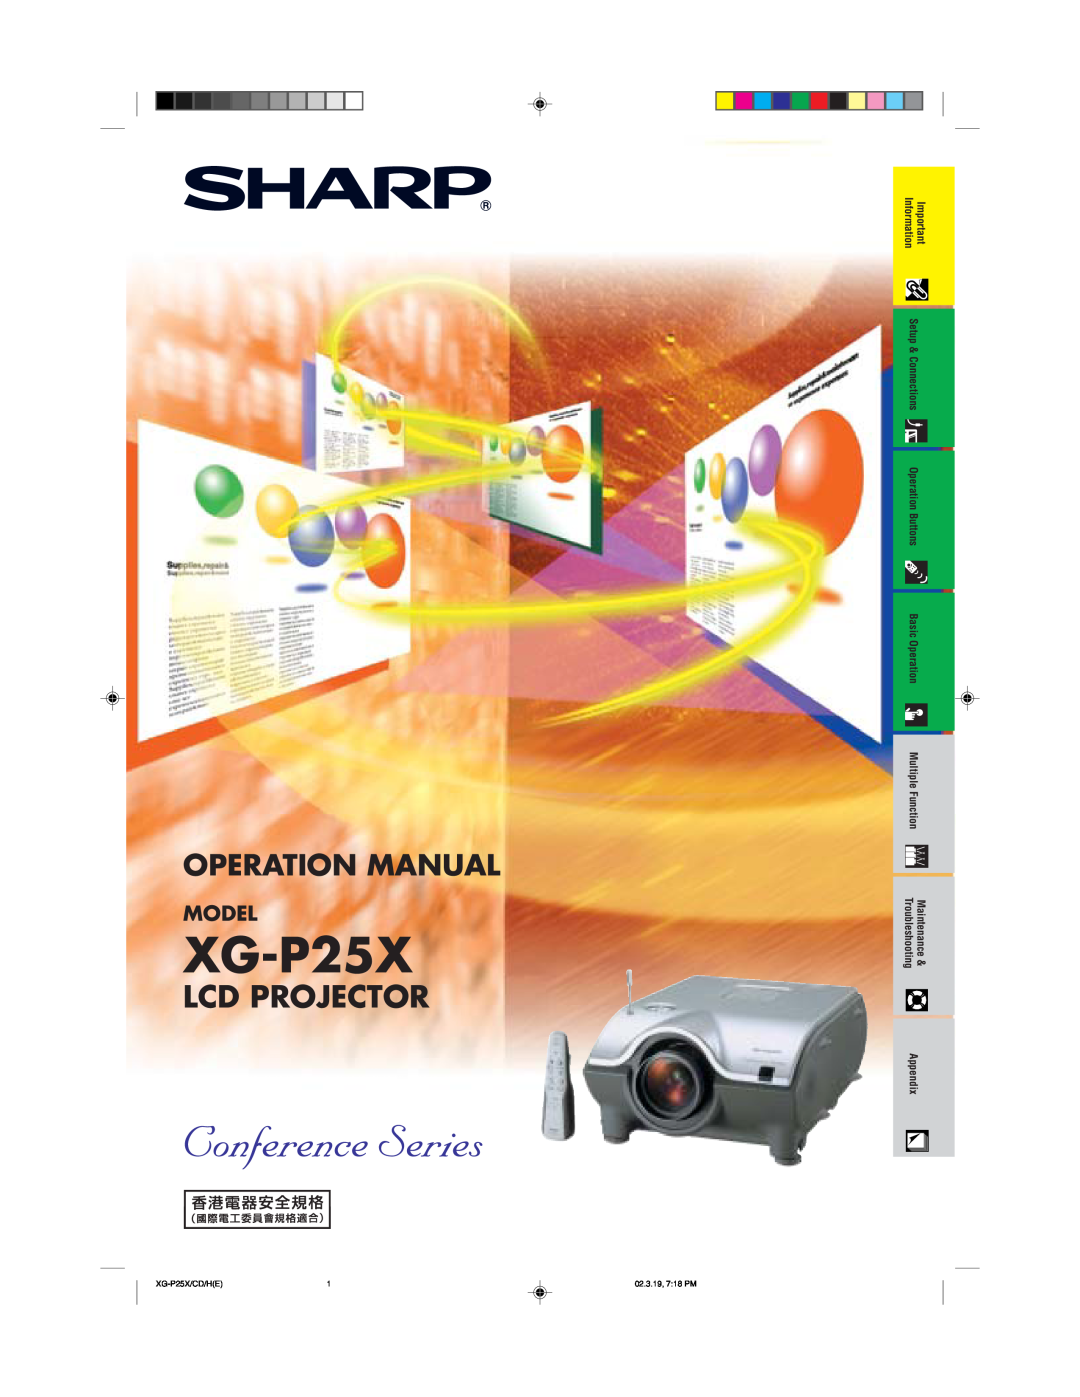 Sharp XG-P25X operation manual Lcd Projector, Operation Manual, Model, Information, Setup& Connections, OperationButtons 